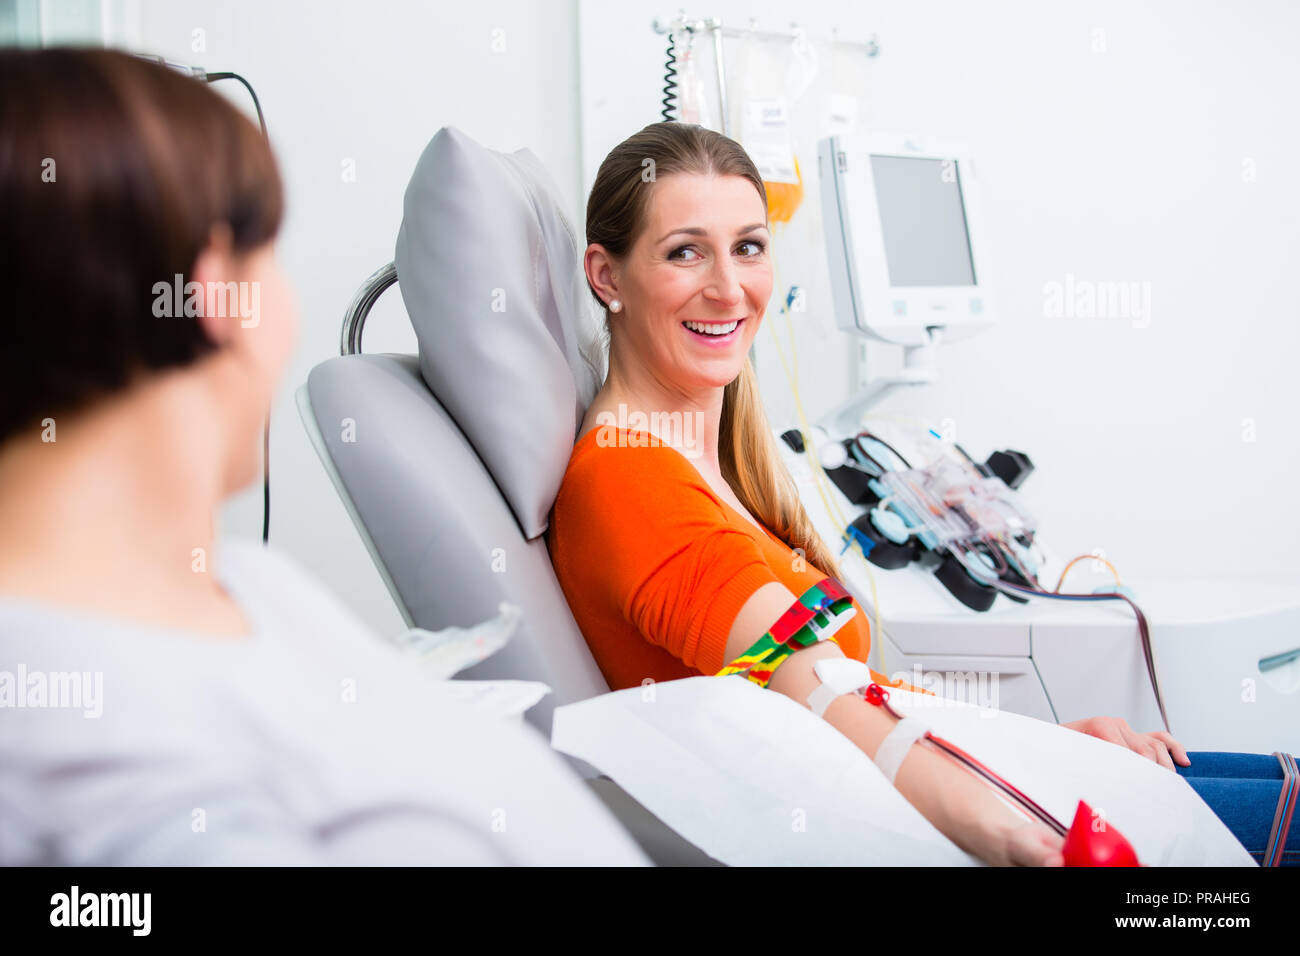 Two women at blood donation drop-in Stock Photo